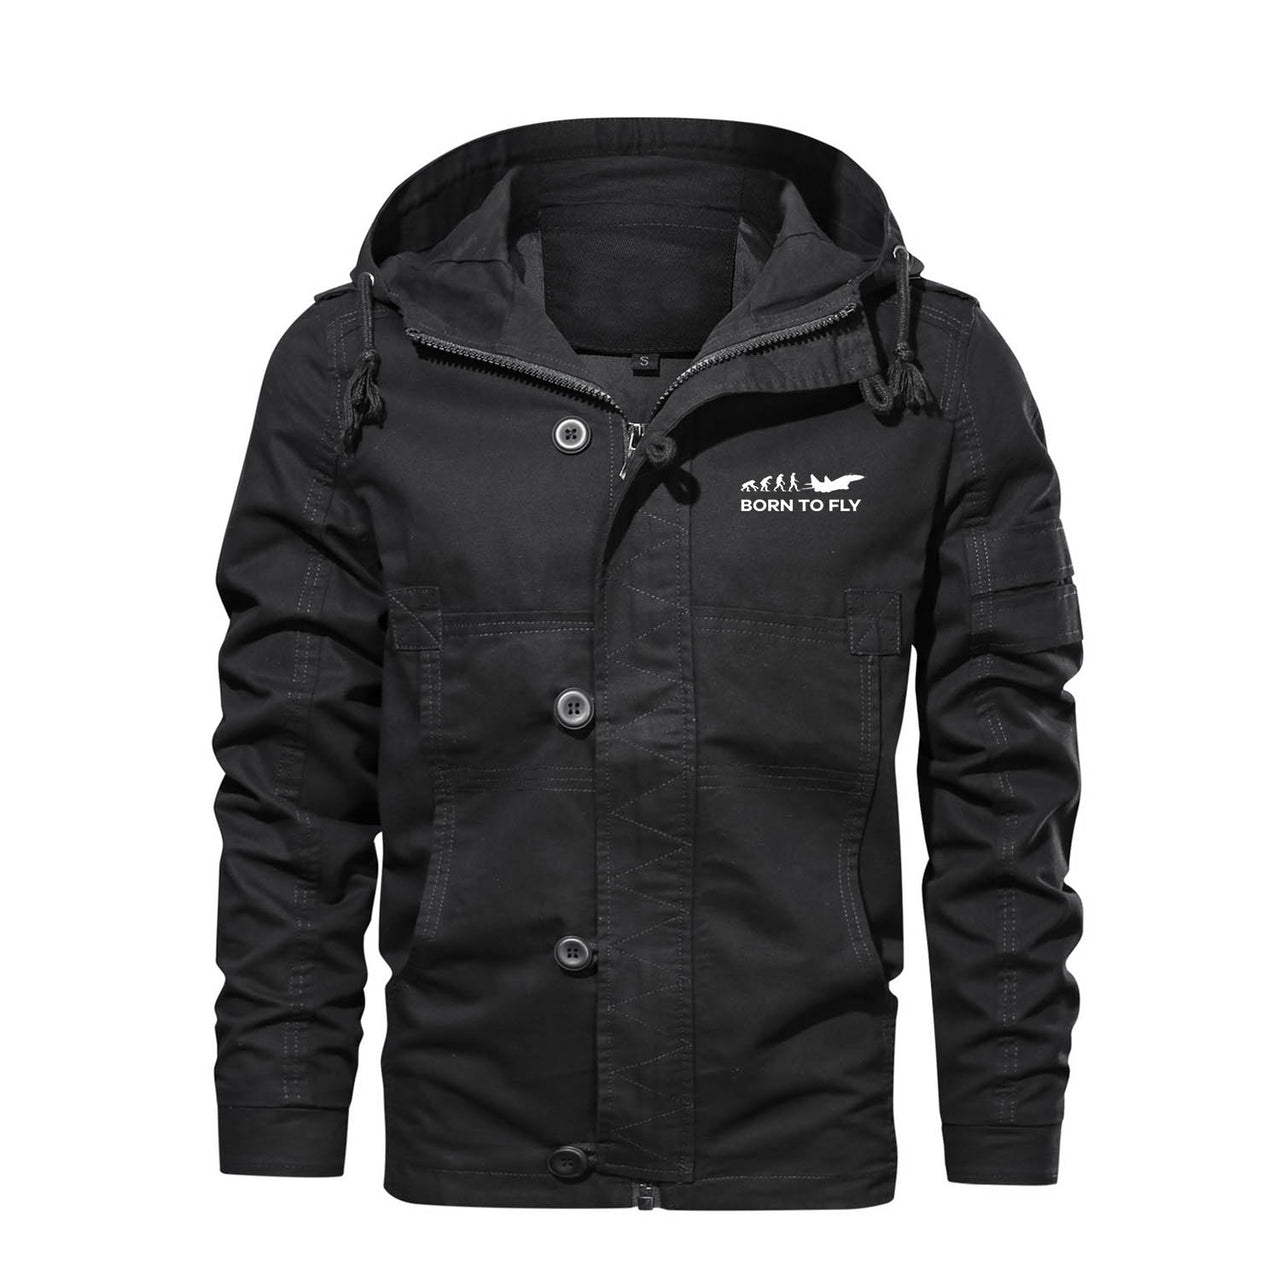 Born To Fly Military Designed Cotton Jackets